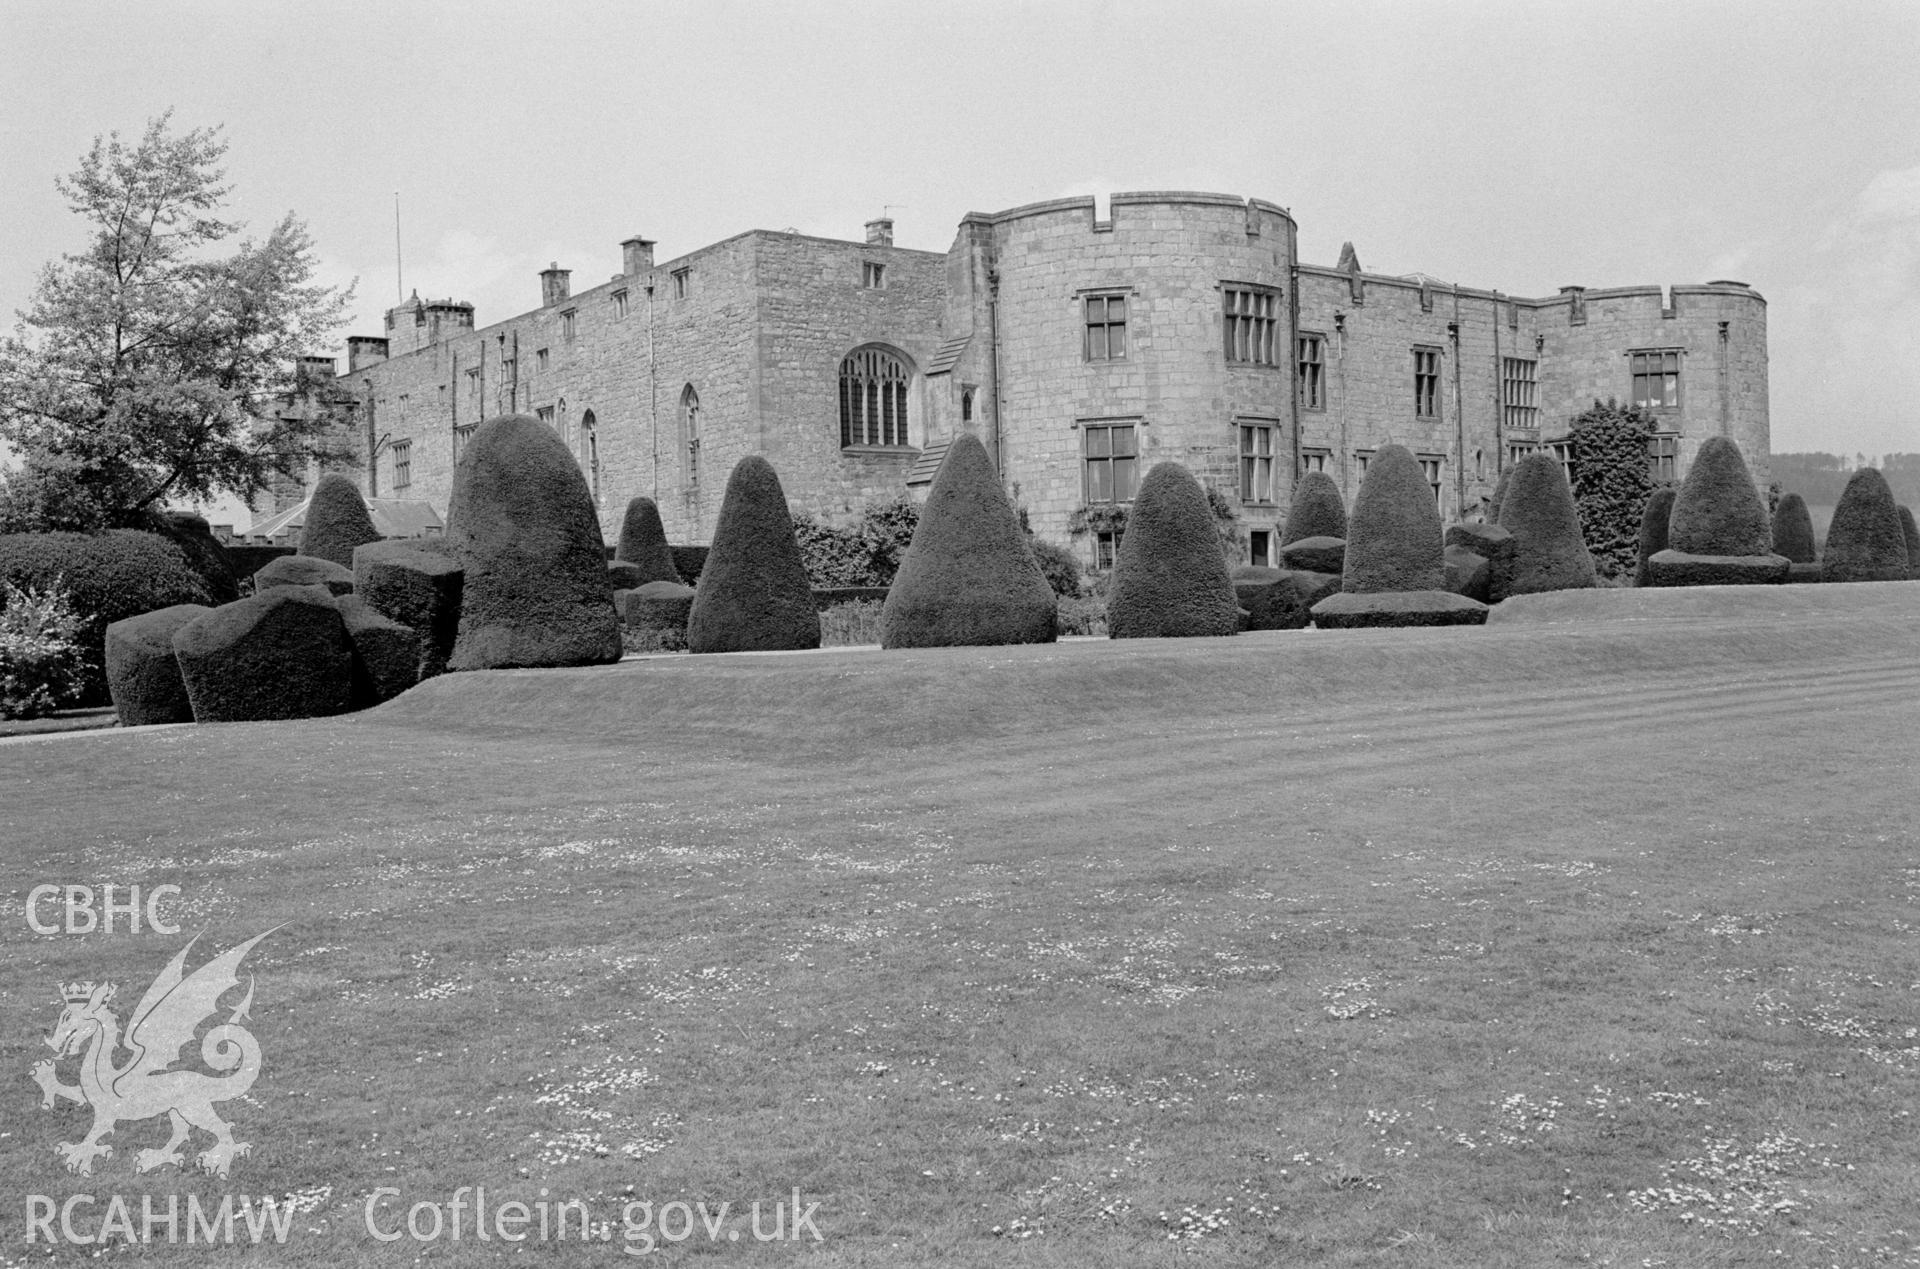 Exterior view of Chirk Castle, collated by the former Central Office of Information.